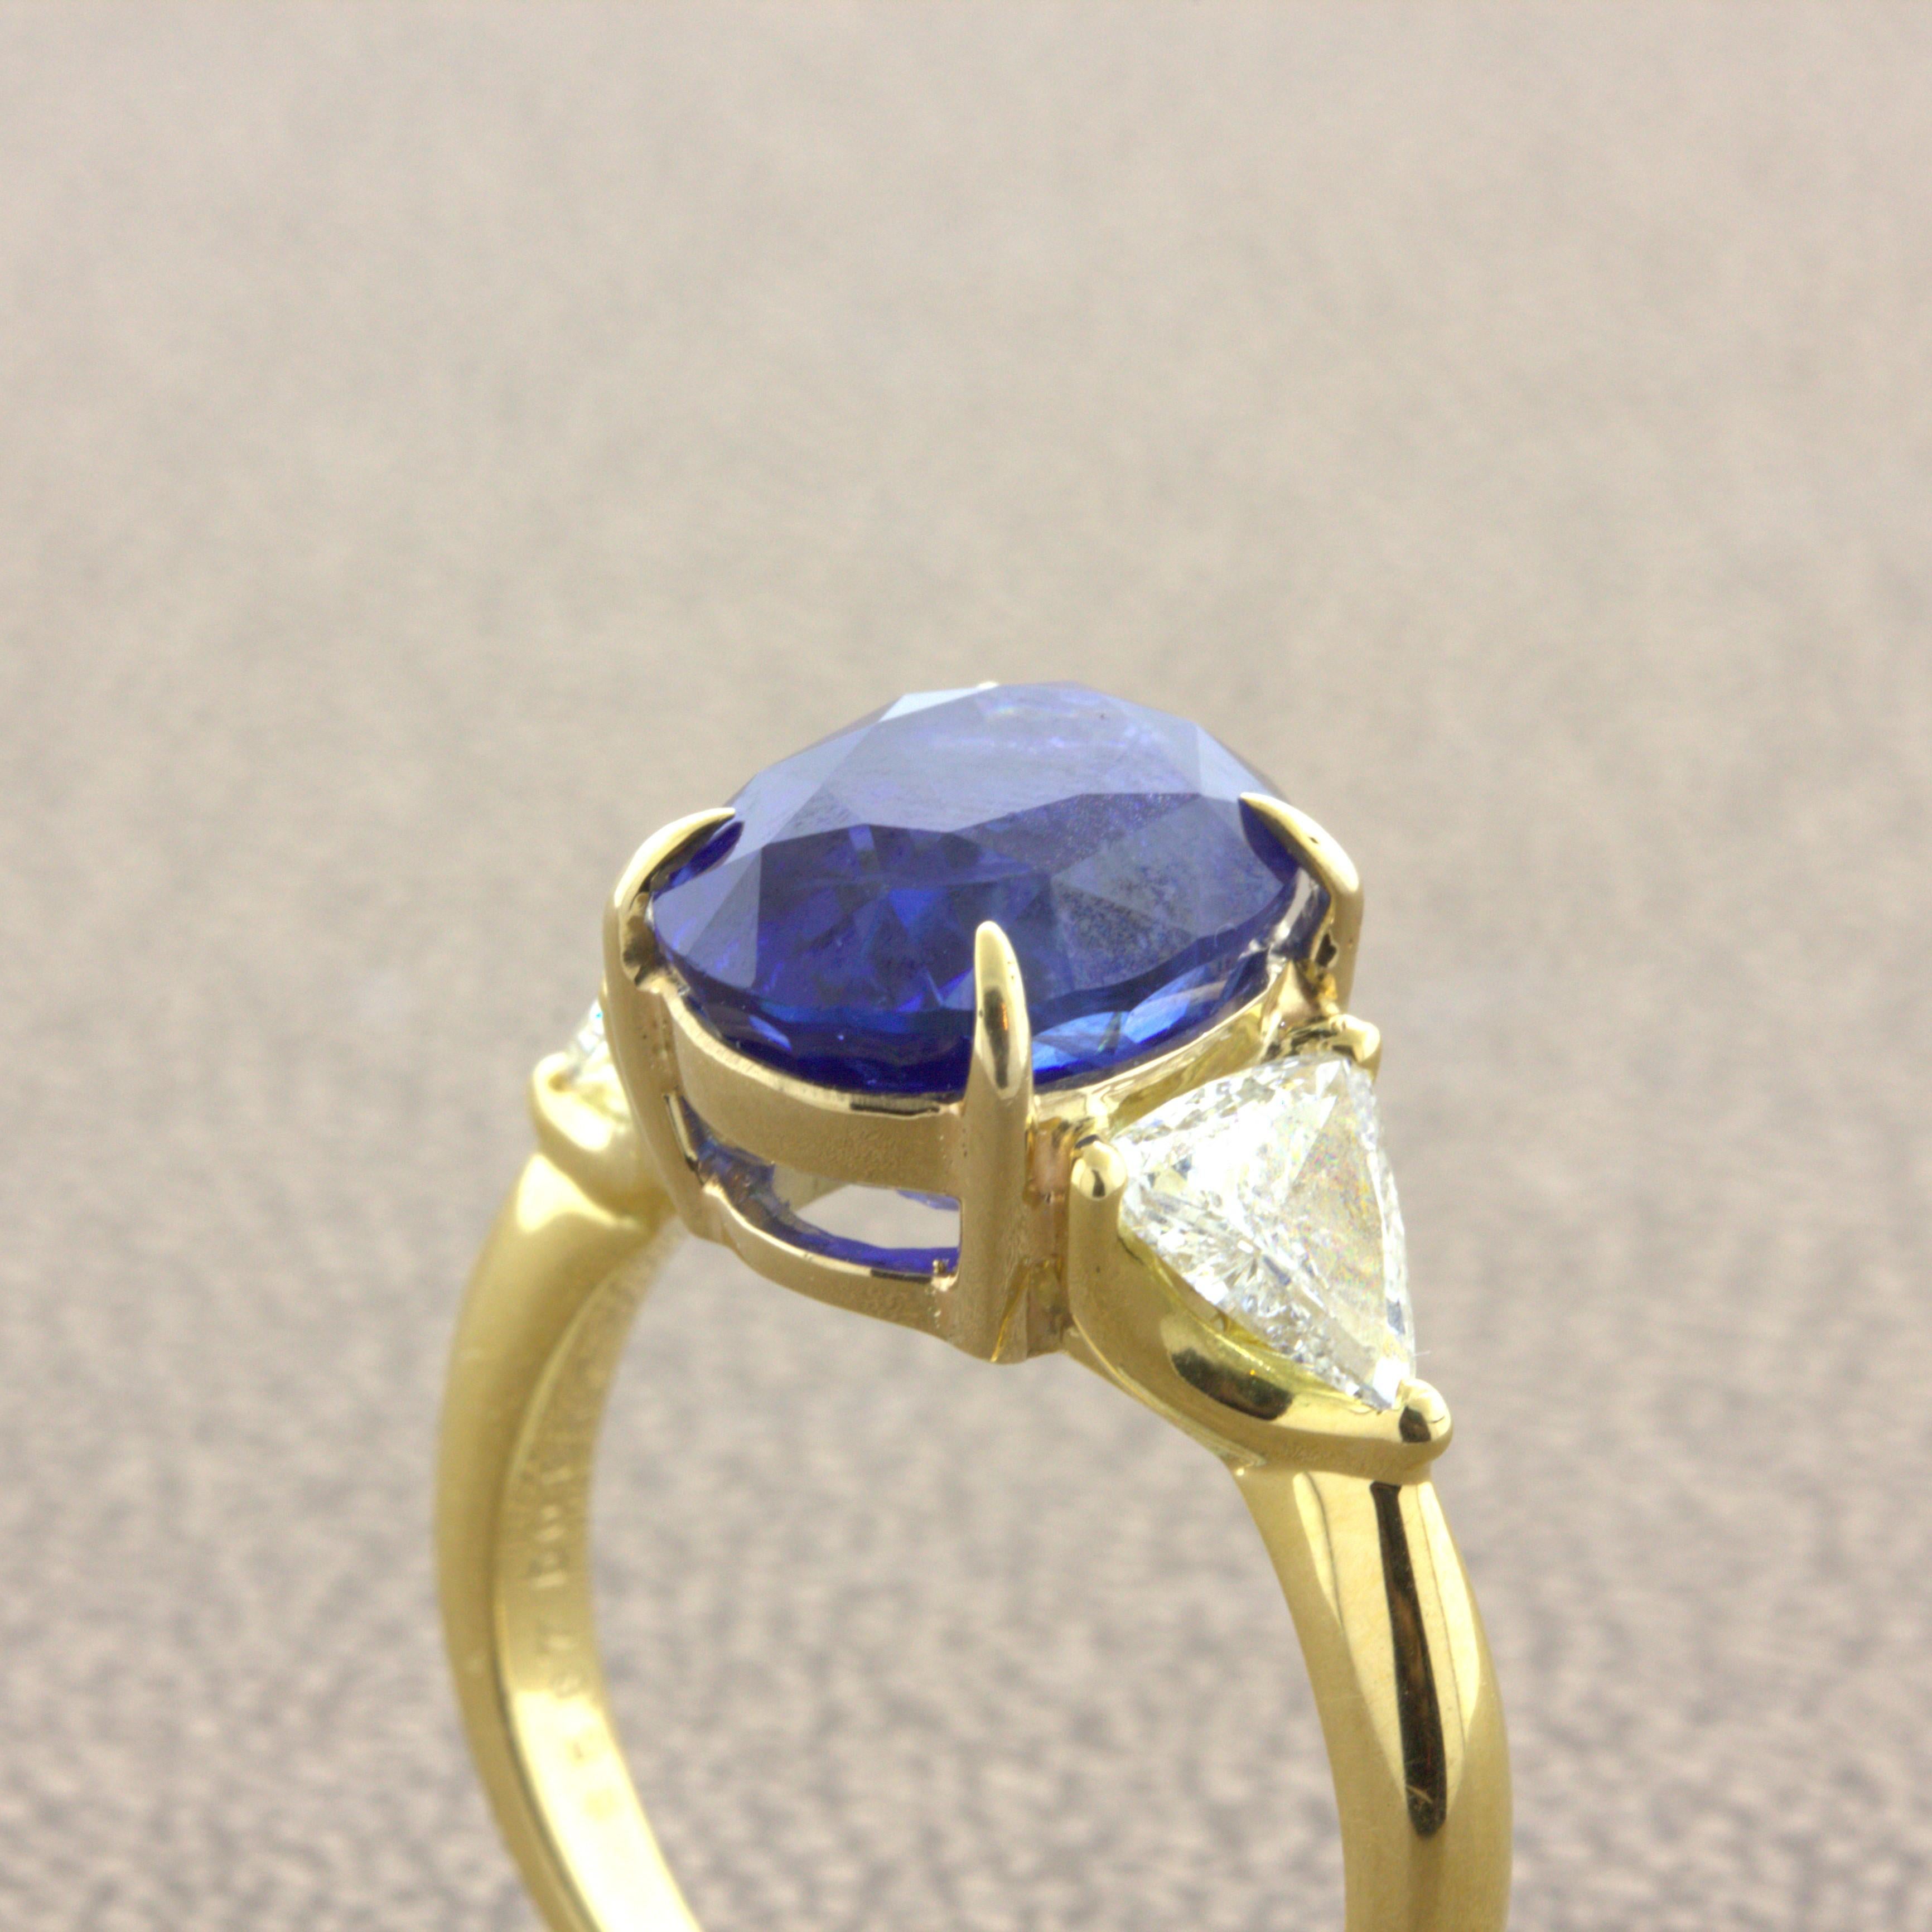 5.87 Carat Blue Sapphire Diamond 18k Yellow Gold 3-Stone Ring, GIA Certified For Sale 2